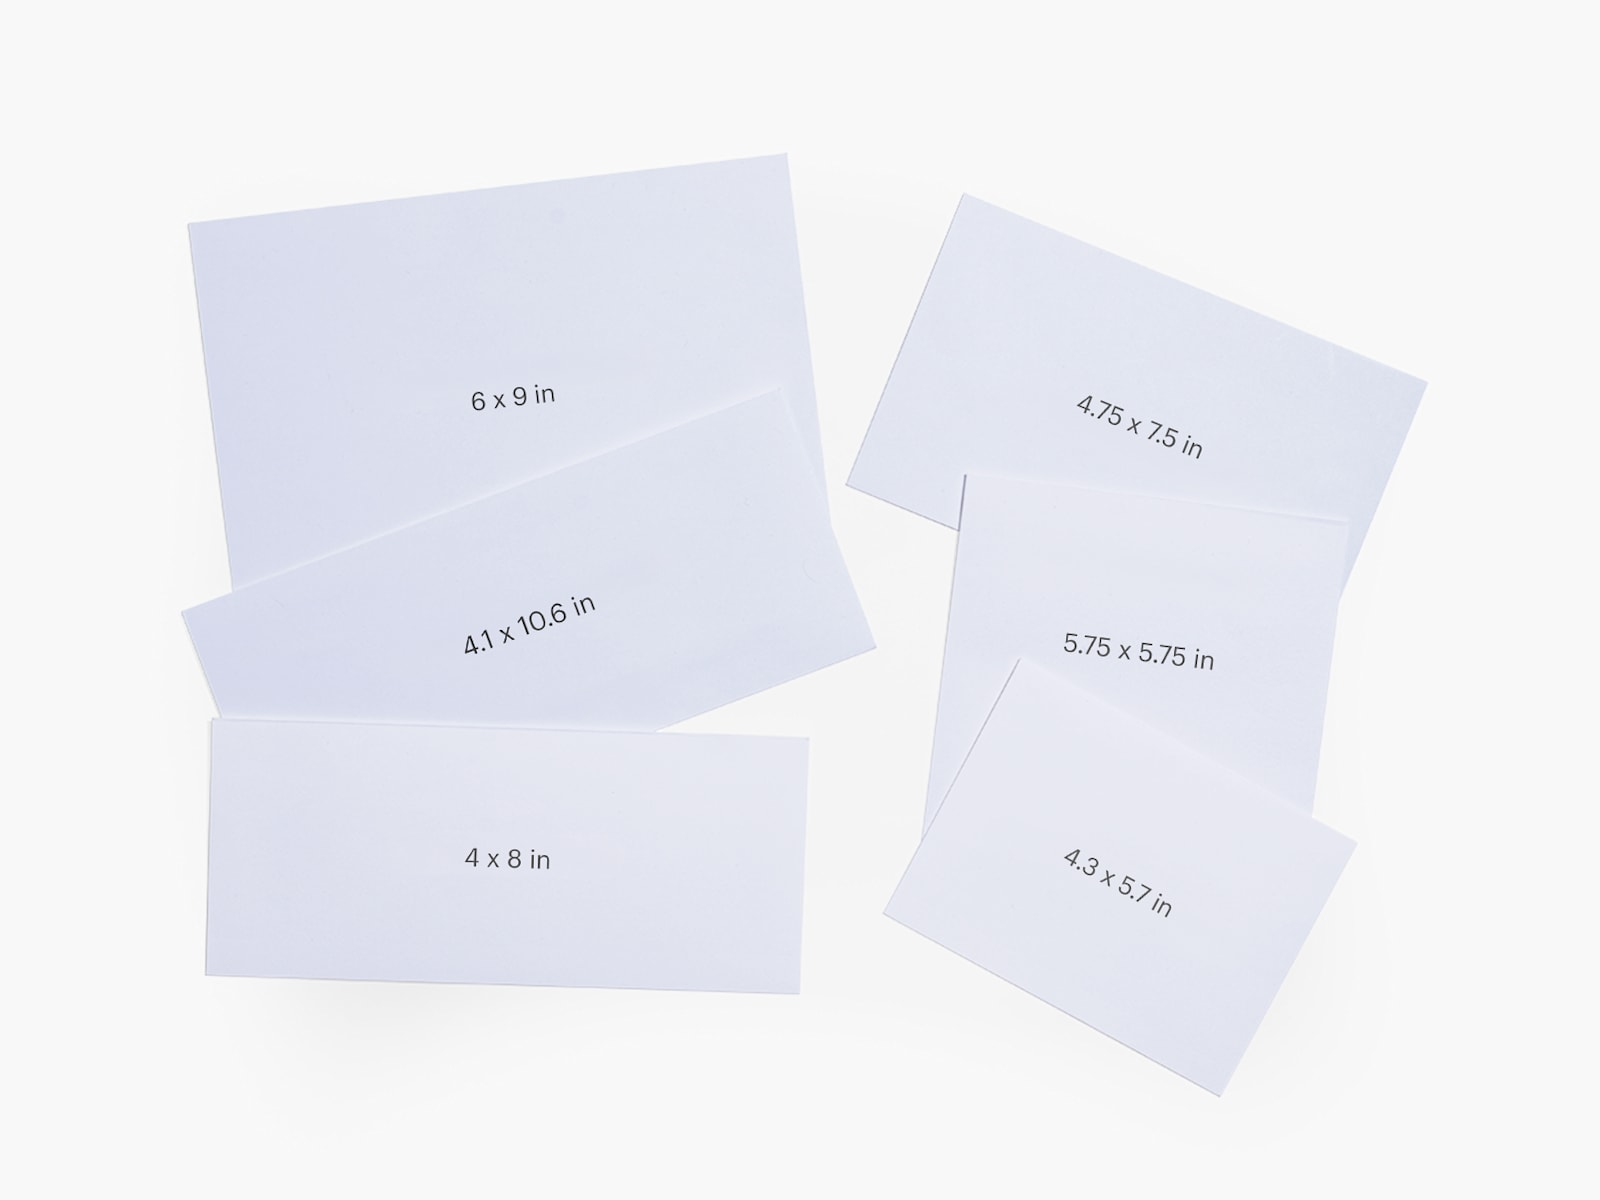 Six different size custom envelopes showign their height and width